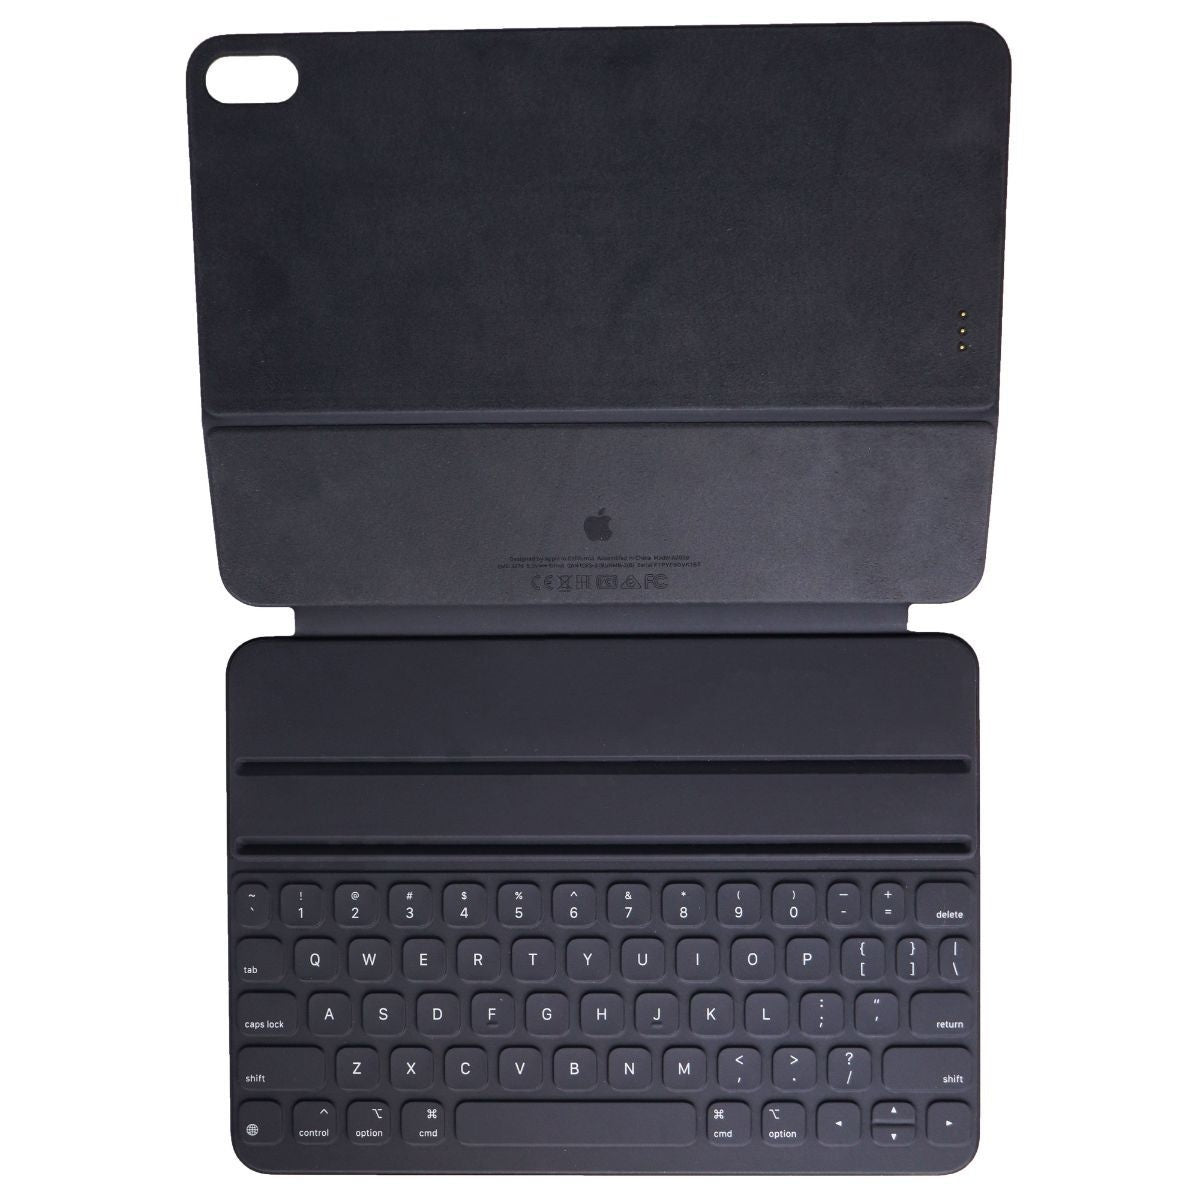 Apple Smart Keyboard Folio for iPad Pro 11 (2018 Model Only) - Black (MU8G2LL/A) iPad/Tablet Accessories - Cases, Covers, Keyboard Folios Apple    - Simple Cell Bulk Wholesale Pricing - USA Seller